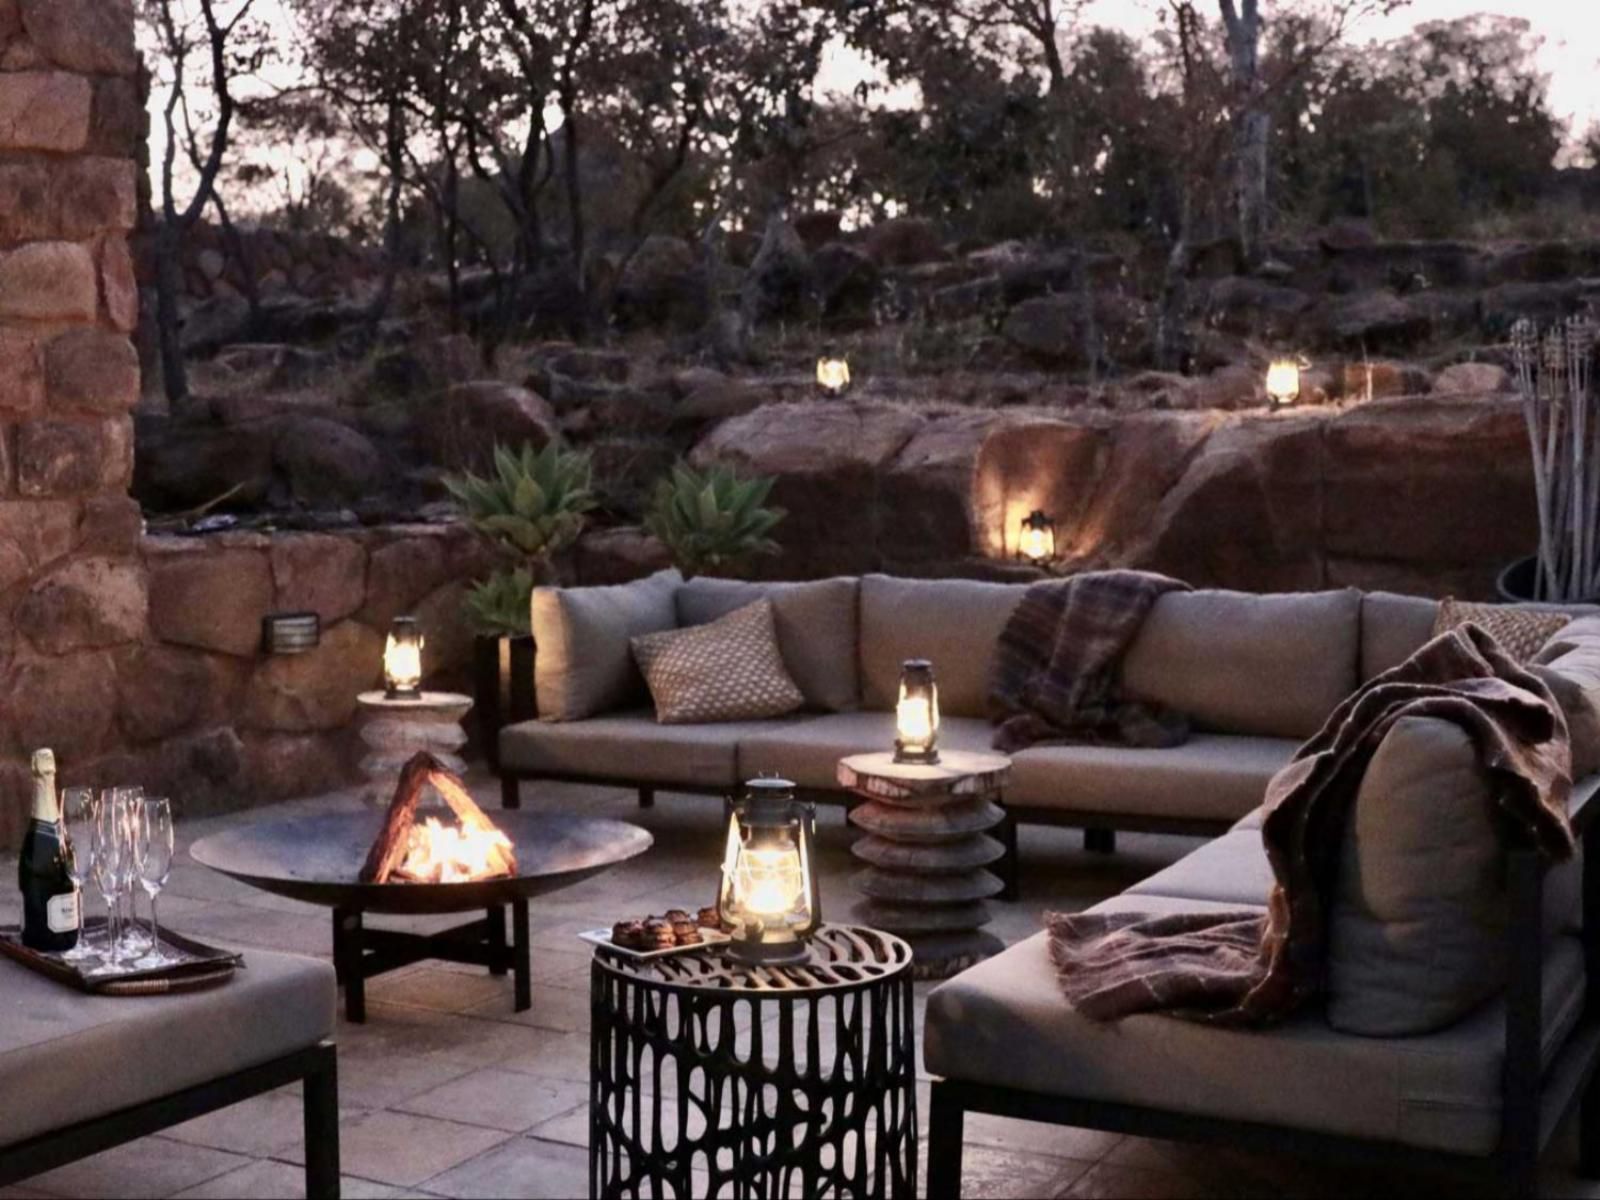 Matomo Exclusive Luxury Safari Lodge Welgevonden Game Reserve Limpopo Province South Africa Fire, Nature